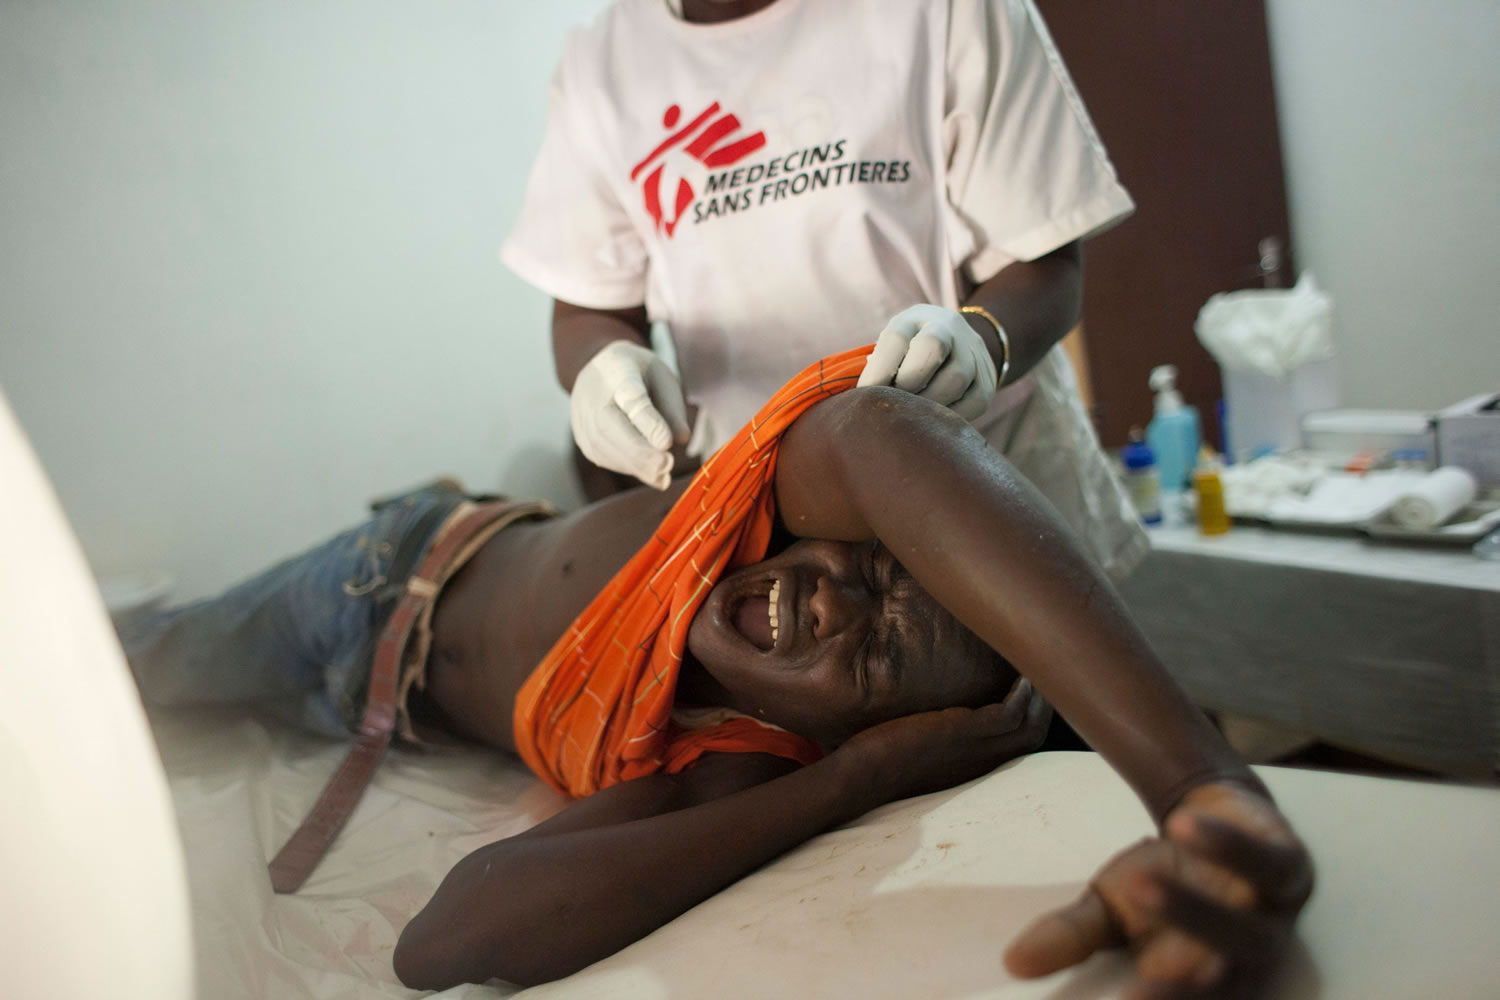 A young man who was hit in the back by a stray bullet on Christmas Eve cries out in pain as he receives medical care Wednesday at a Doctors Without Borders clinic in Bangui, Central African Republic.